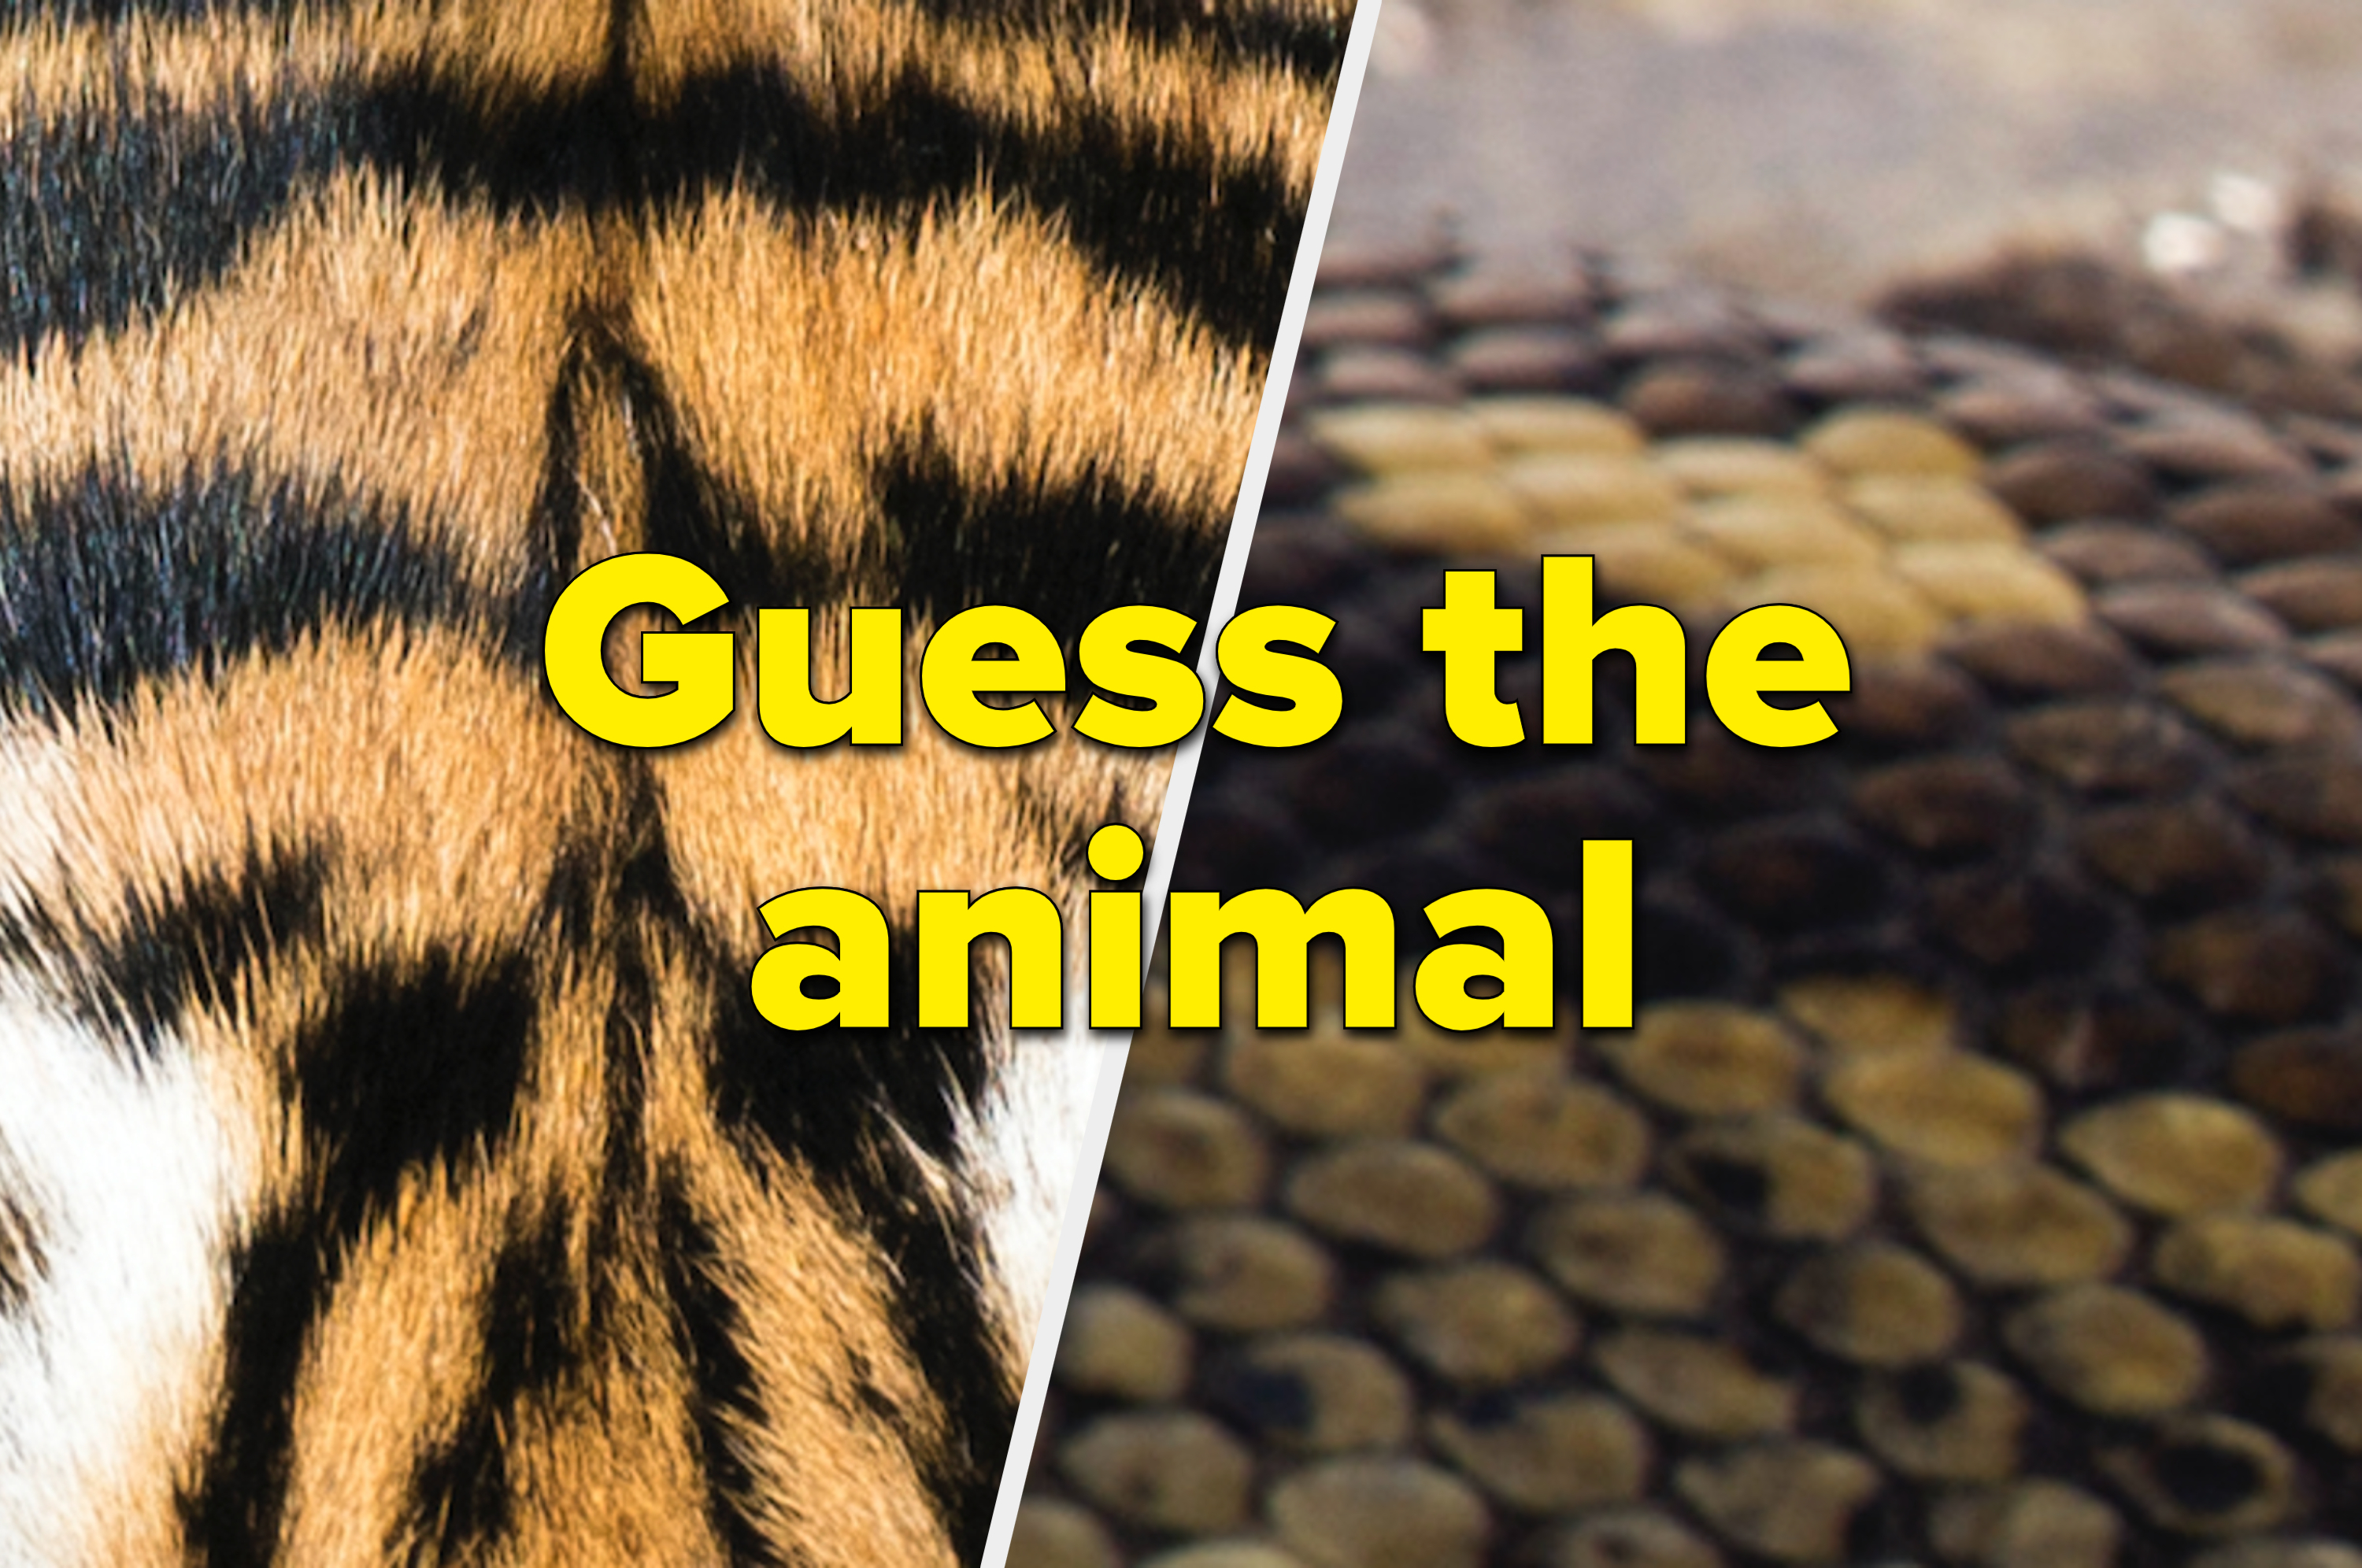 Animal Close-Ups: Can You Correctly Guess The Animal?